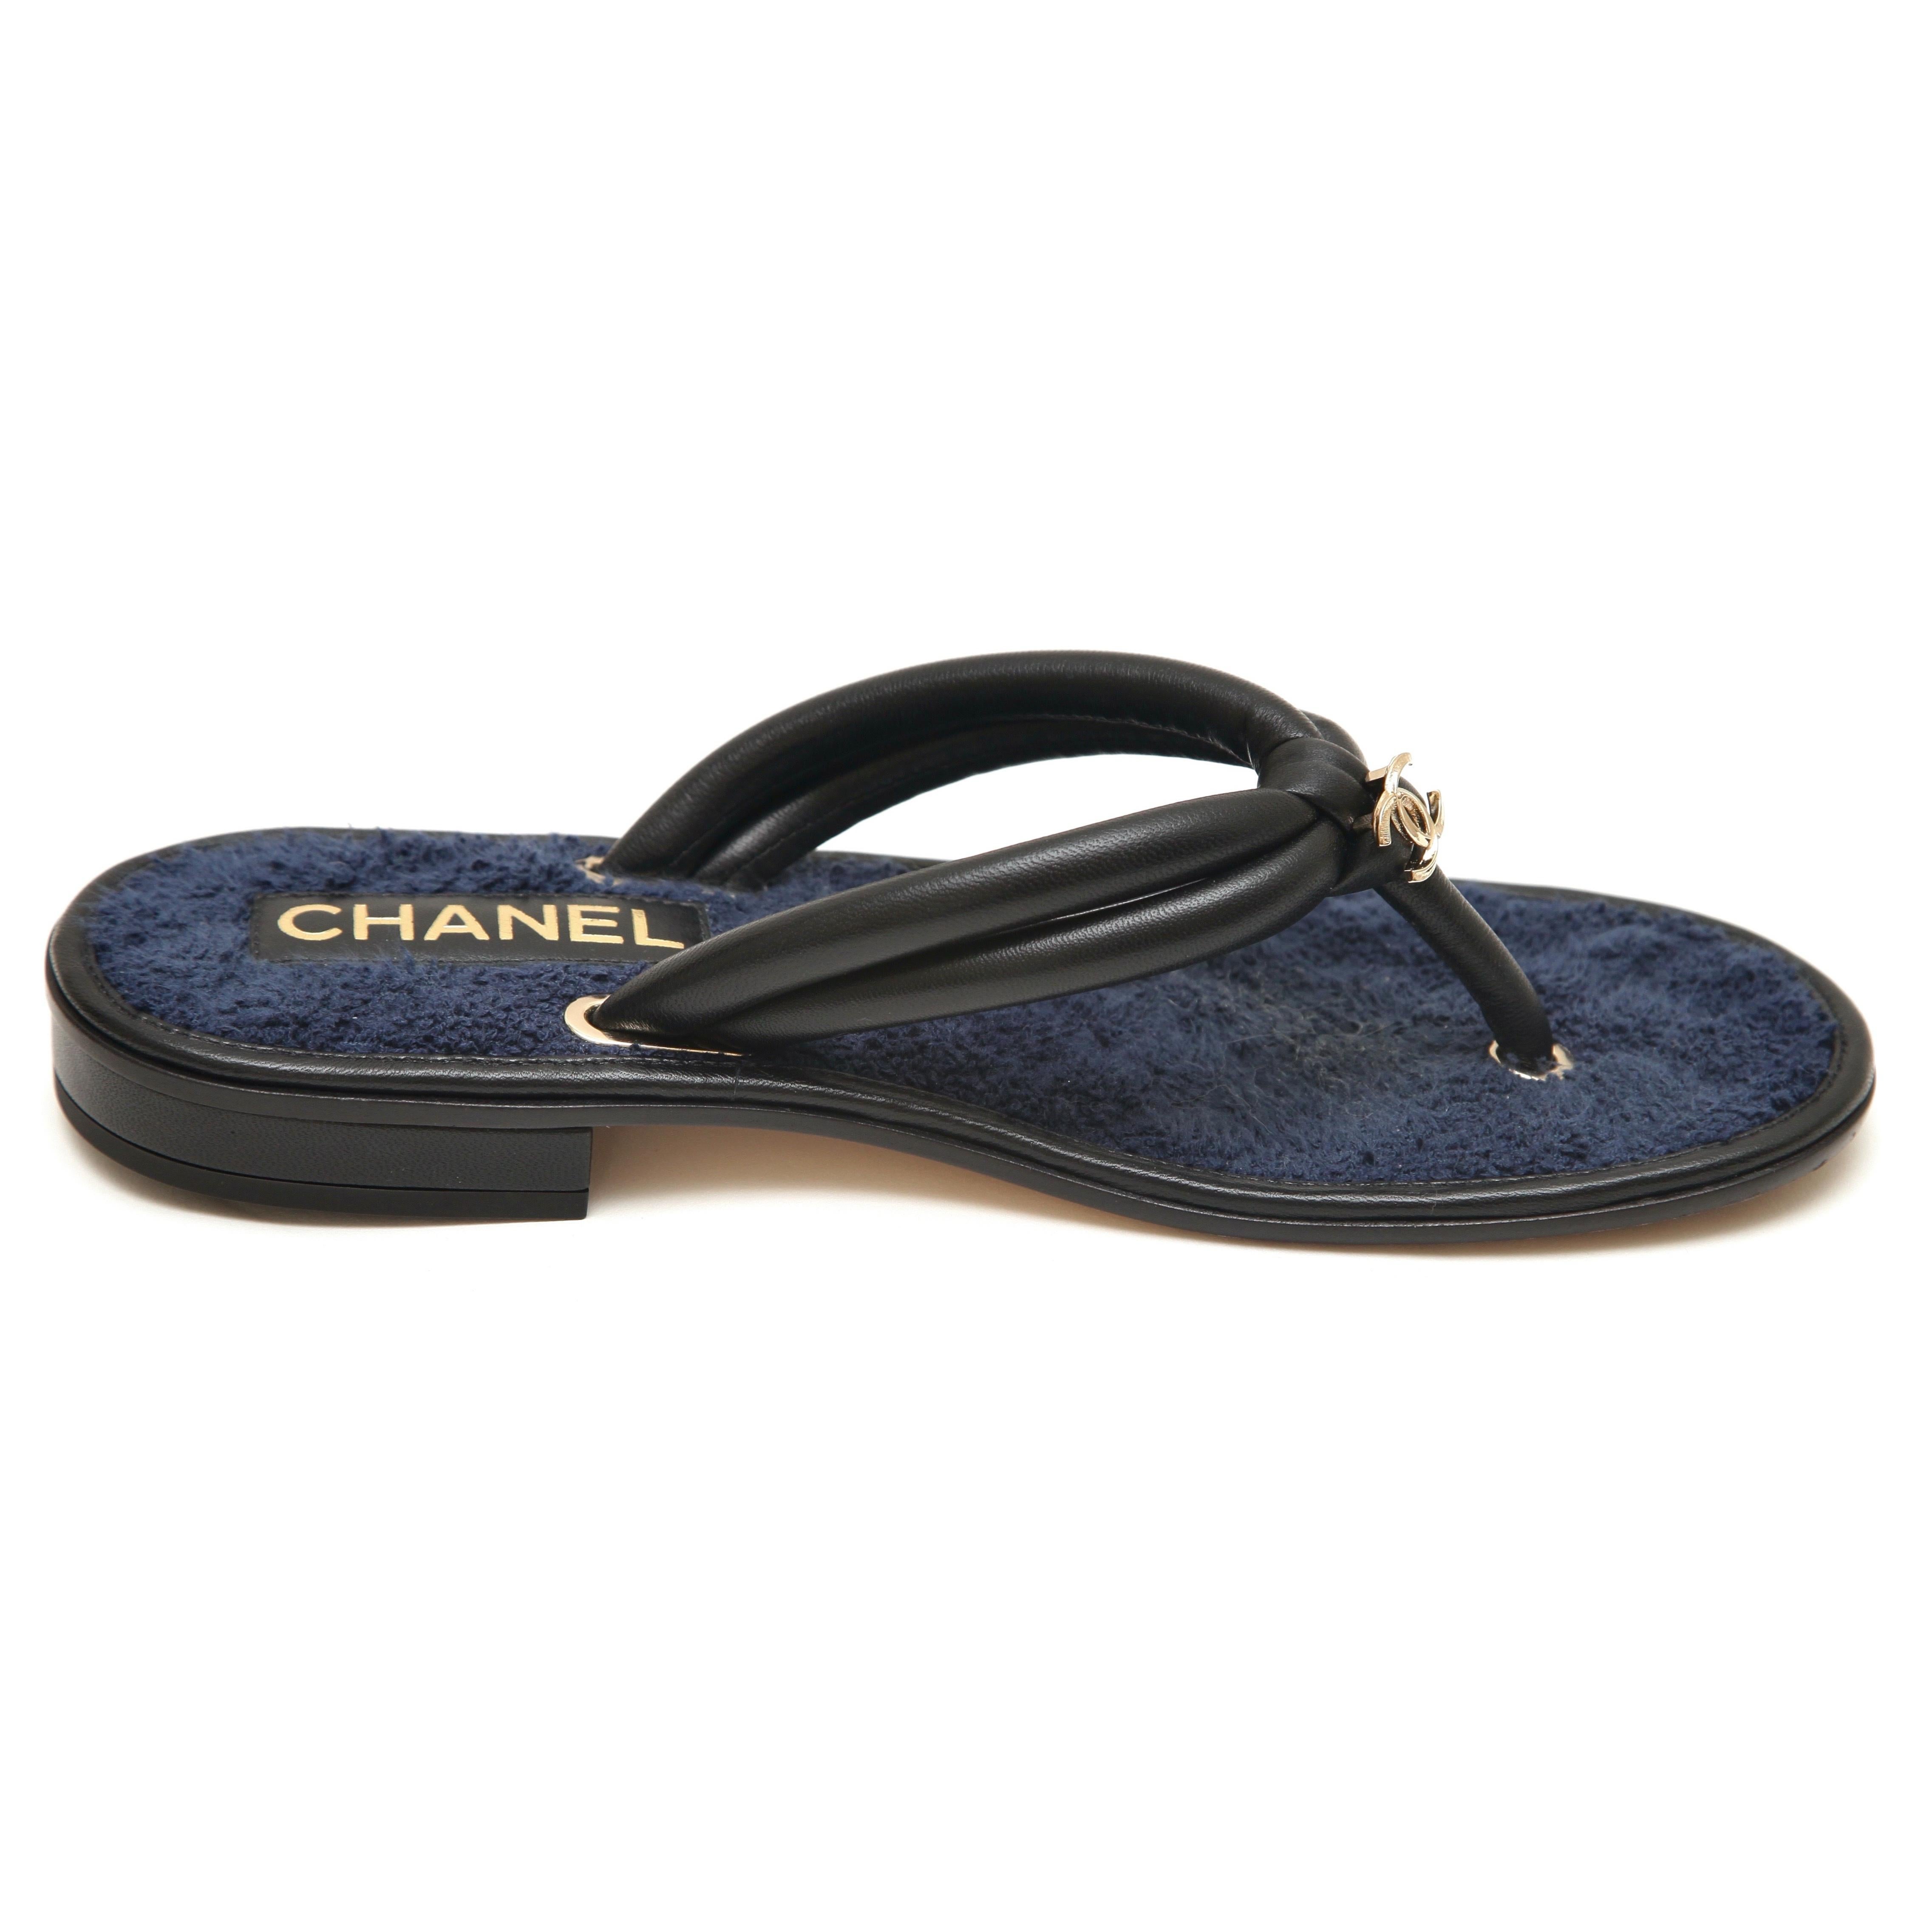 GUARANTEED AUTHENTIC 2021 BLACK LEATHER NAVY FABRIC THONG SANDALS


Design:
- Leather and fabric uppers.
- CC logo in gold at top.
- Thong style lip on.
- Fabric insole, leather outsole.
- Comes with dust bags.

Size: 38C

Measurements